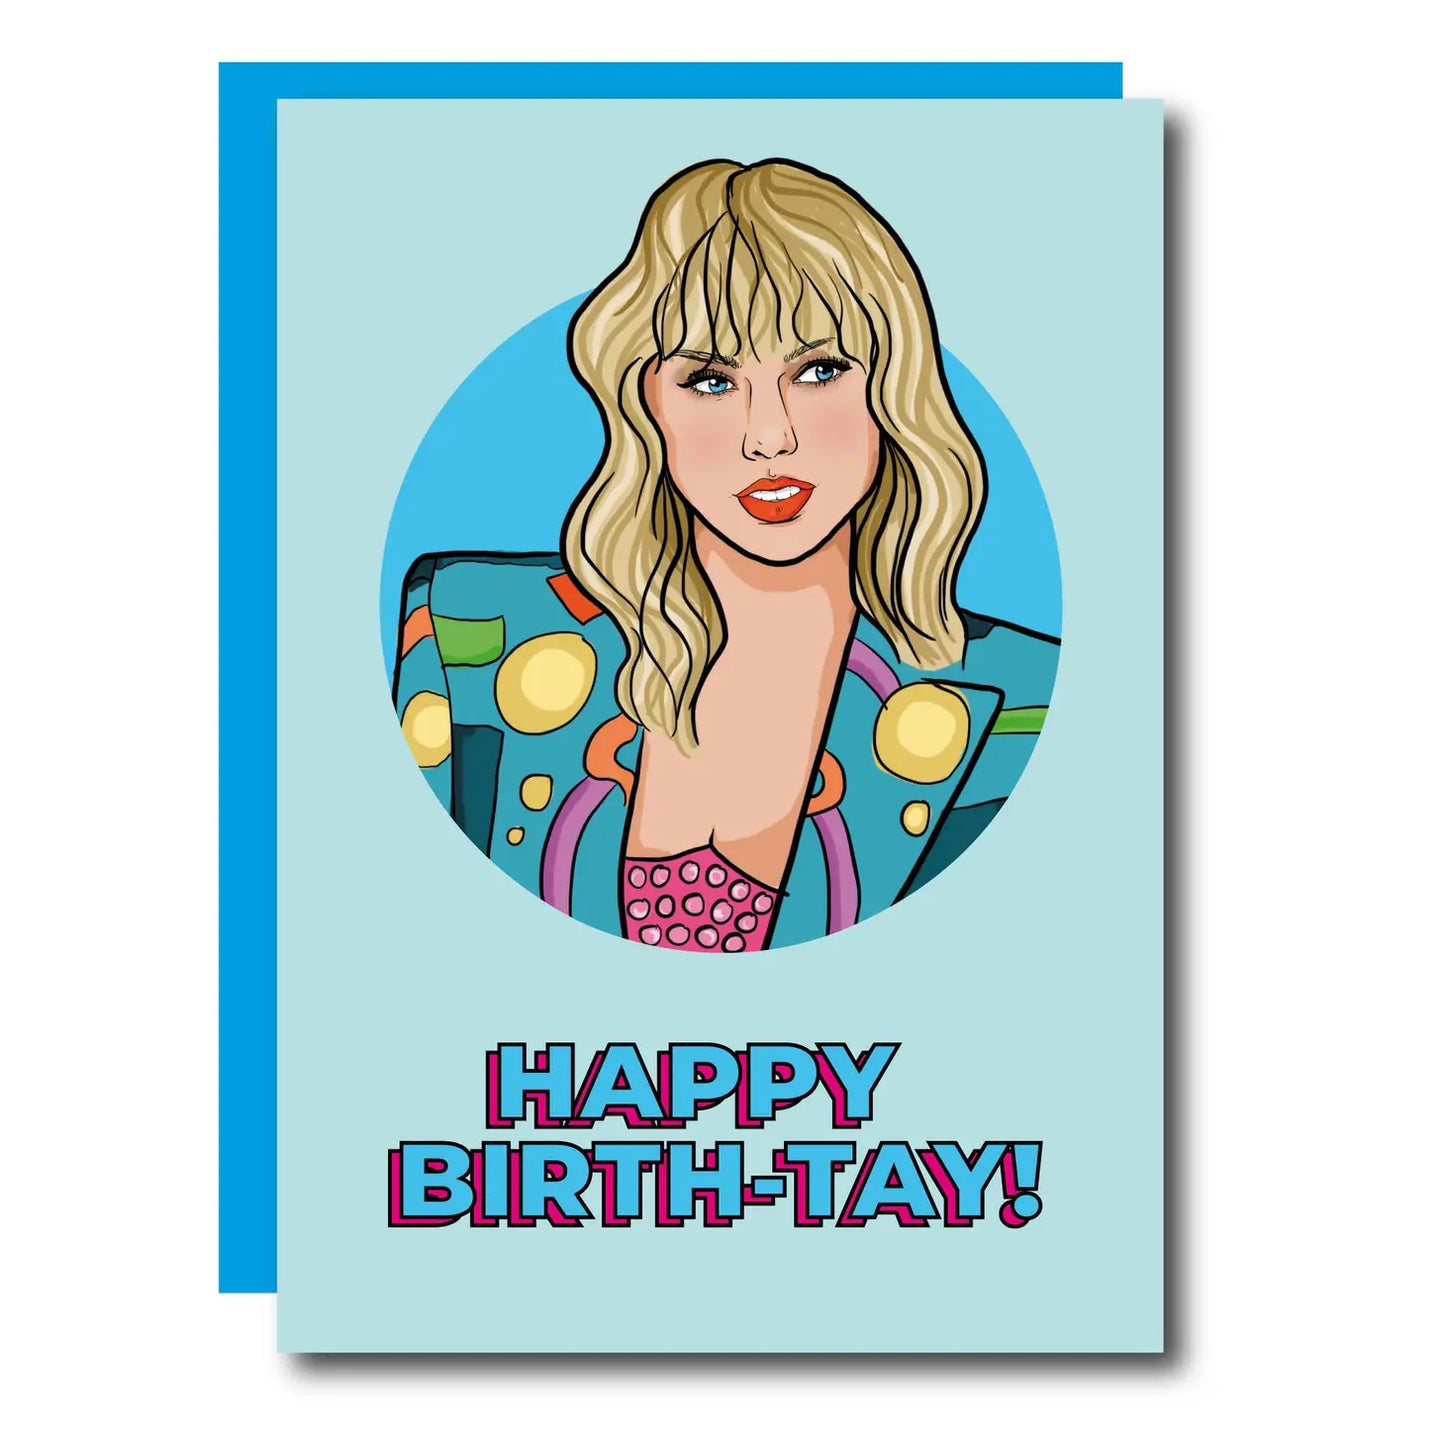 Celebrity Greeting Cards - Bowie, Taylor, Beyonce, Harry Styles + More